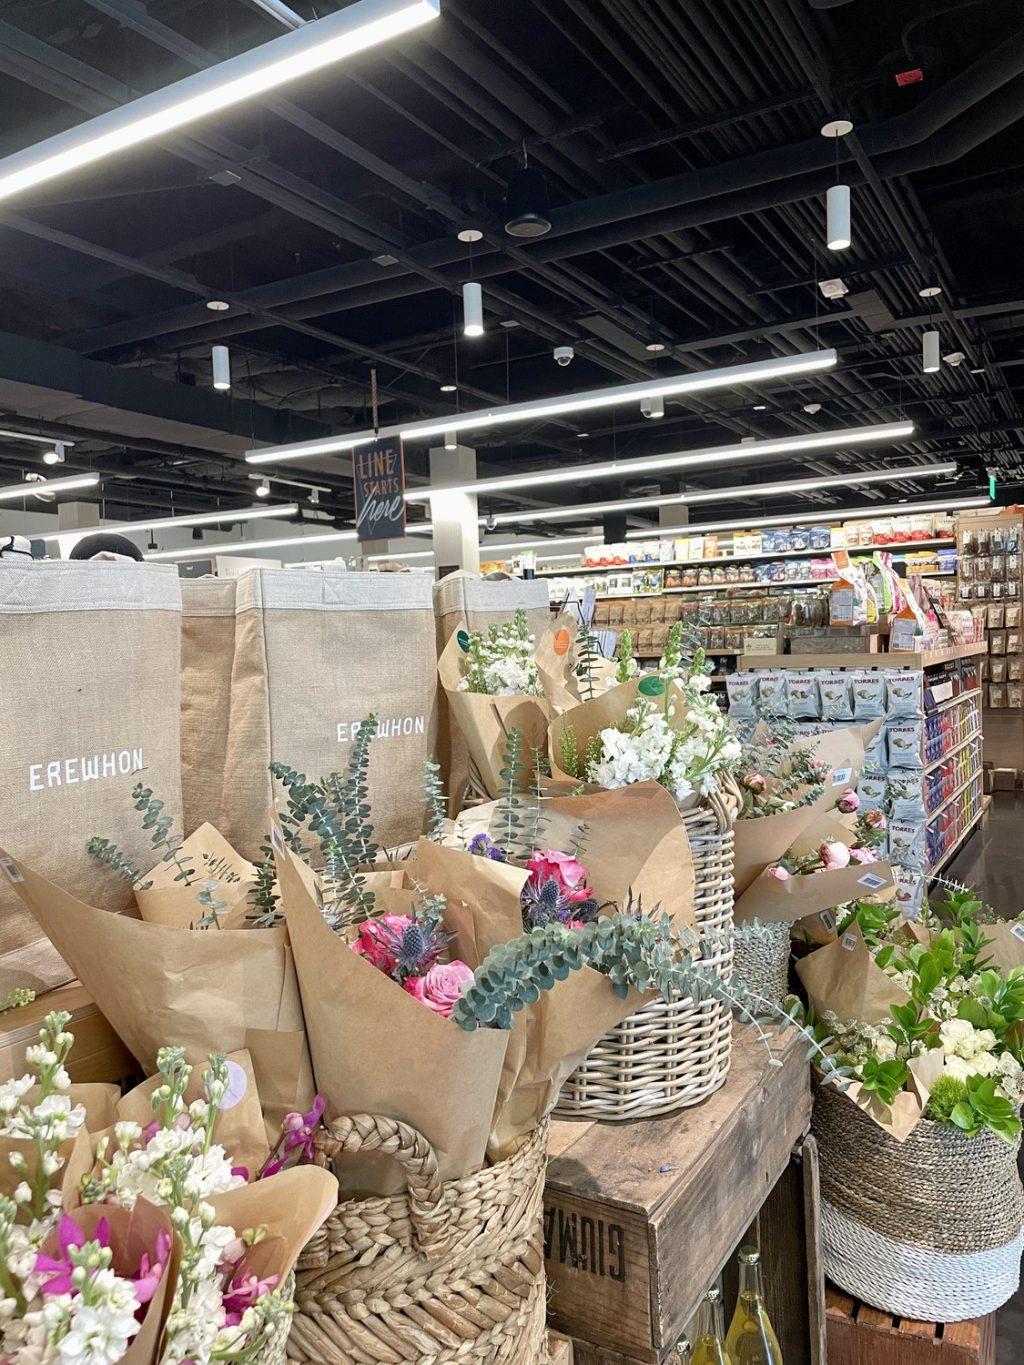 The Erewhon brand extends across food, offering customers branded products such as tote bags, flowers and home essentials displayed near registers.  The company has also provided customers with health and lifestyle content through its online blog, with posts that include mindfulness tips, skin care guides and helpful immune boosters.